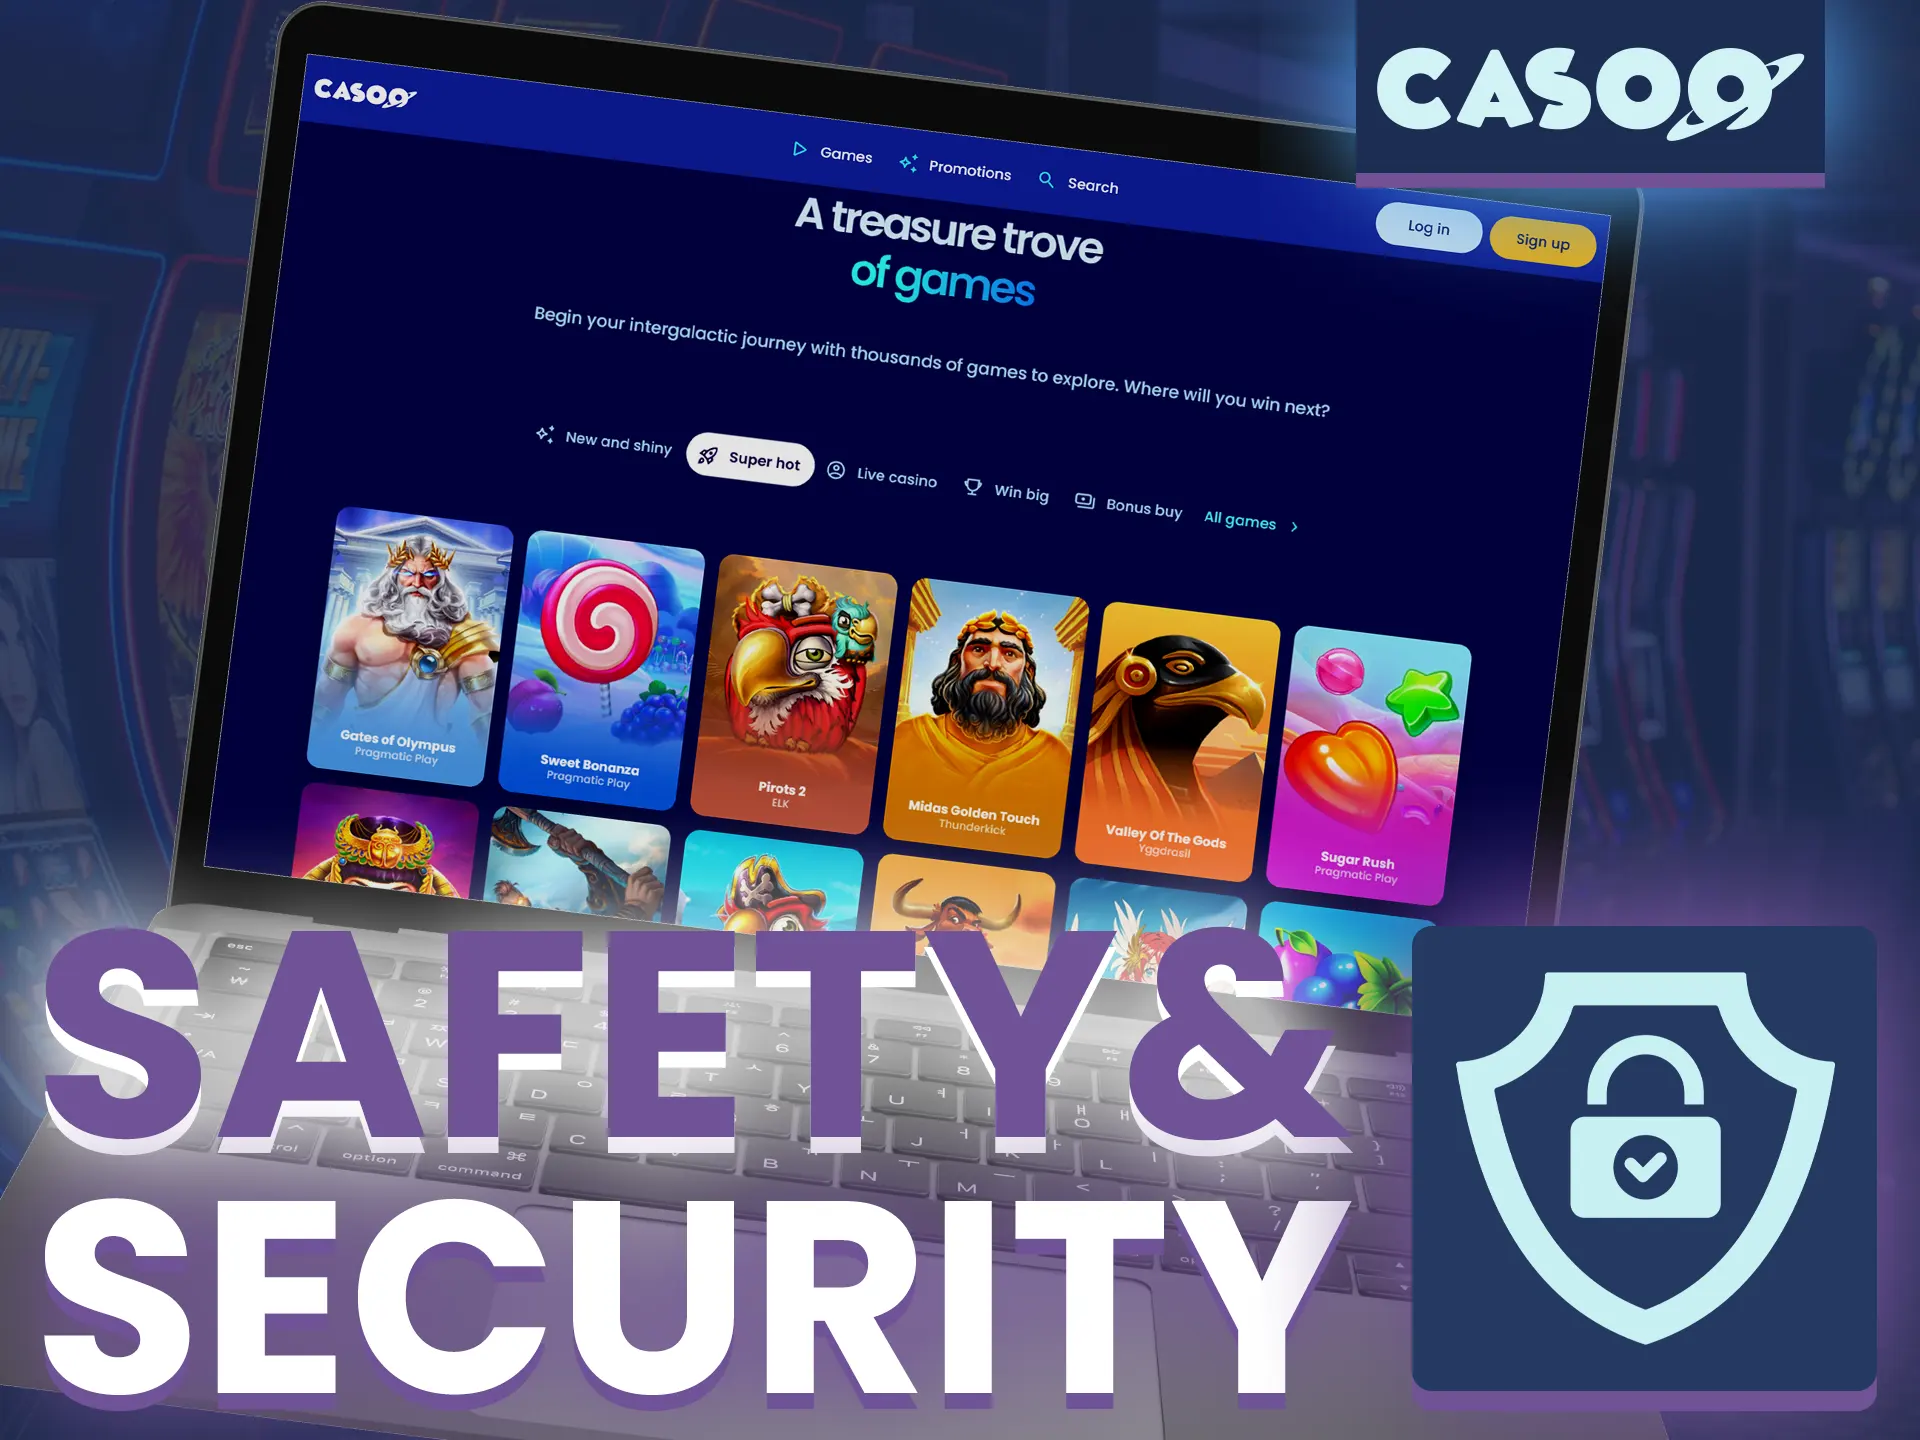 Casoo online casino protects players' personal data and guarantees security.